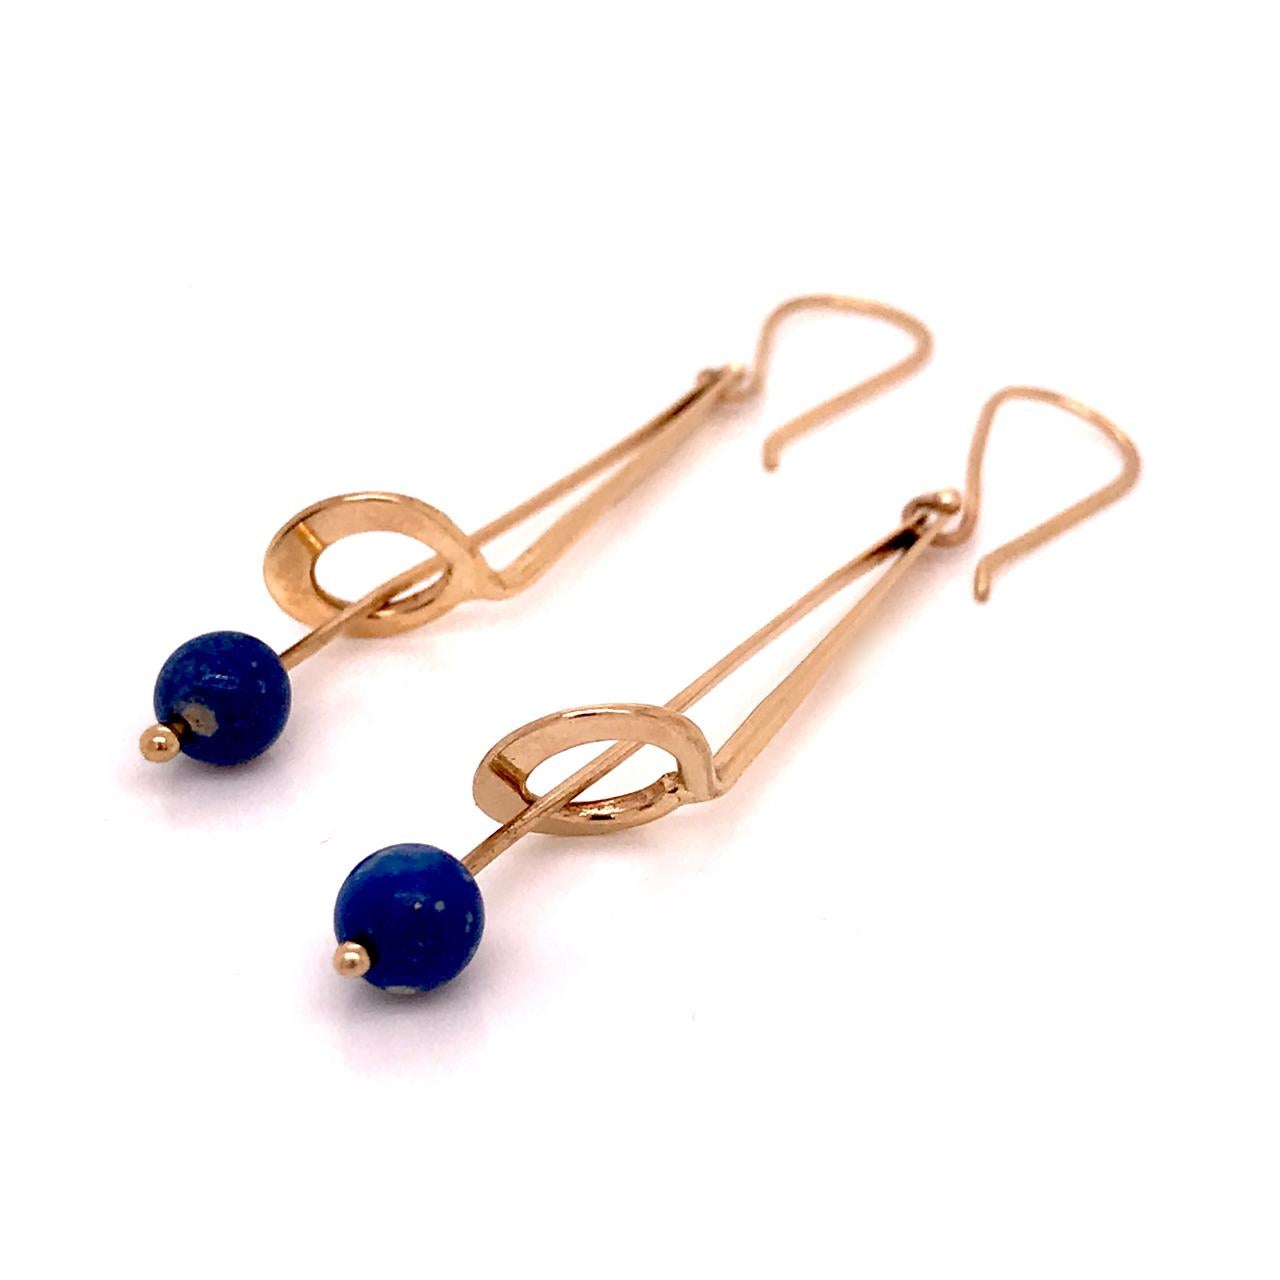 A beautiful pair of earrings by the American modernist Jules Brenner.

Each in 14k gold with a fishhook ear wire and a suspended lapis bead.

Jules Brenner was an important jeweler in the American Modernist jewelry movement. He worked with Ed Wiener